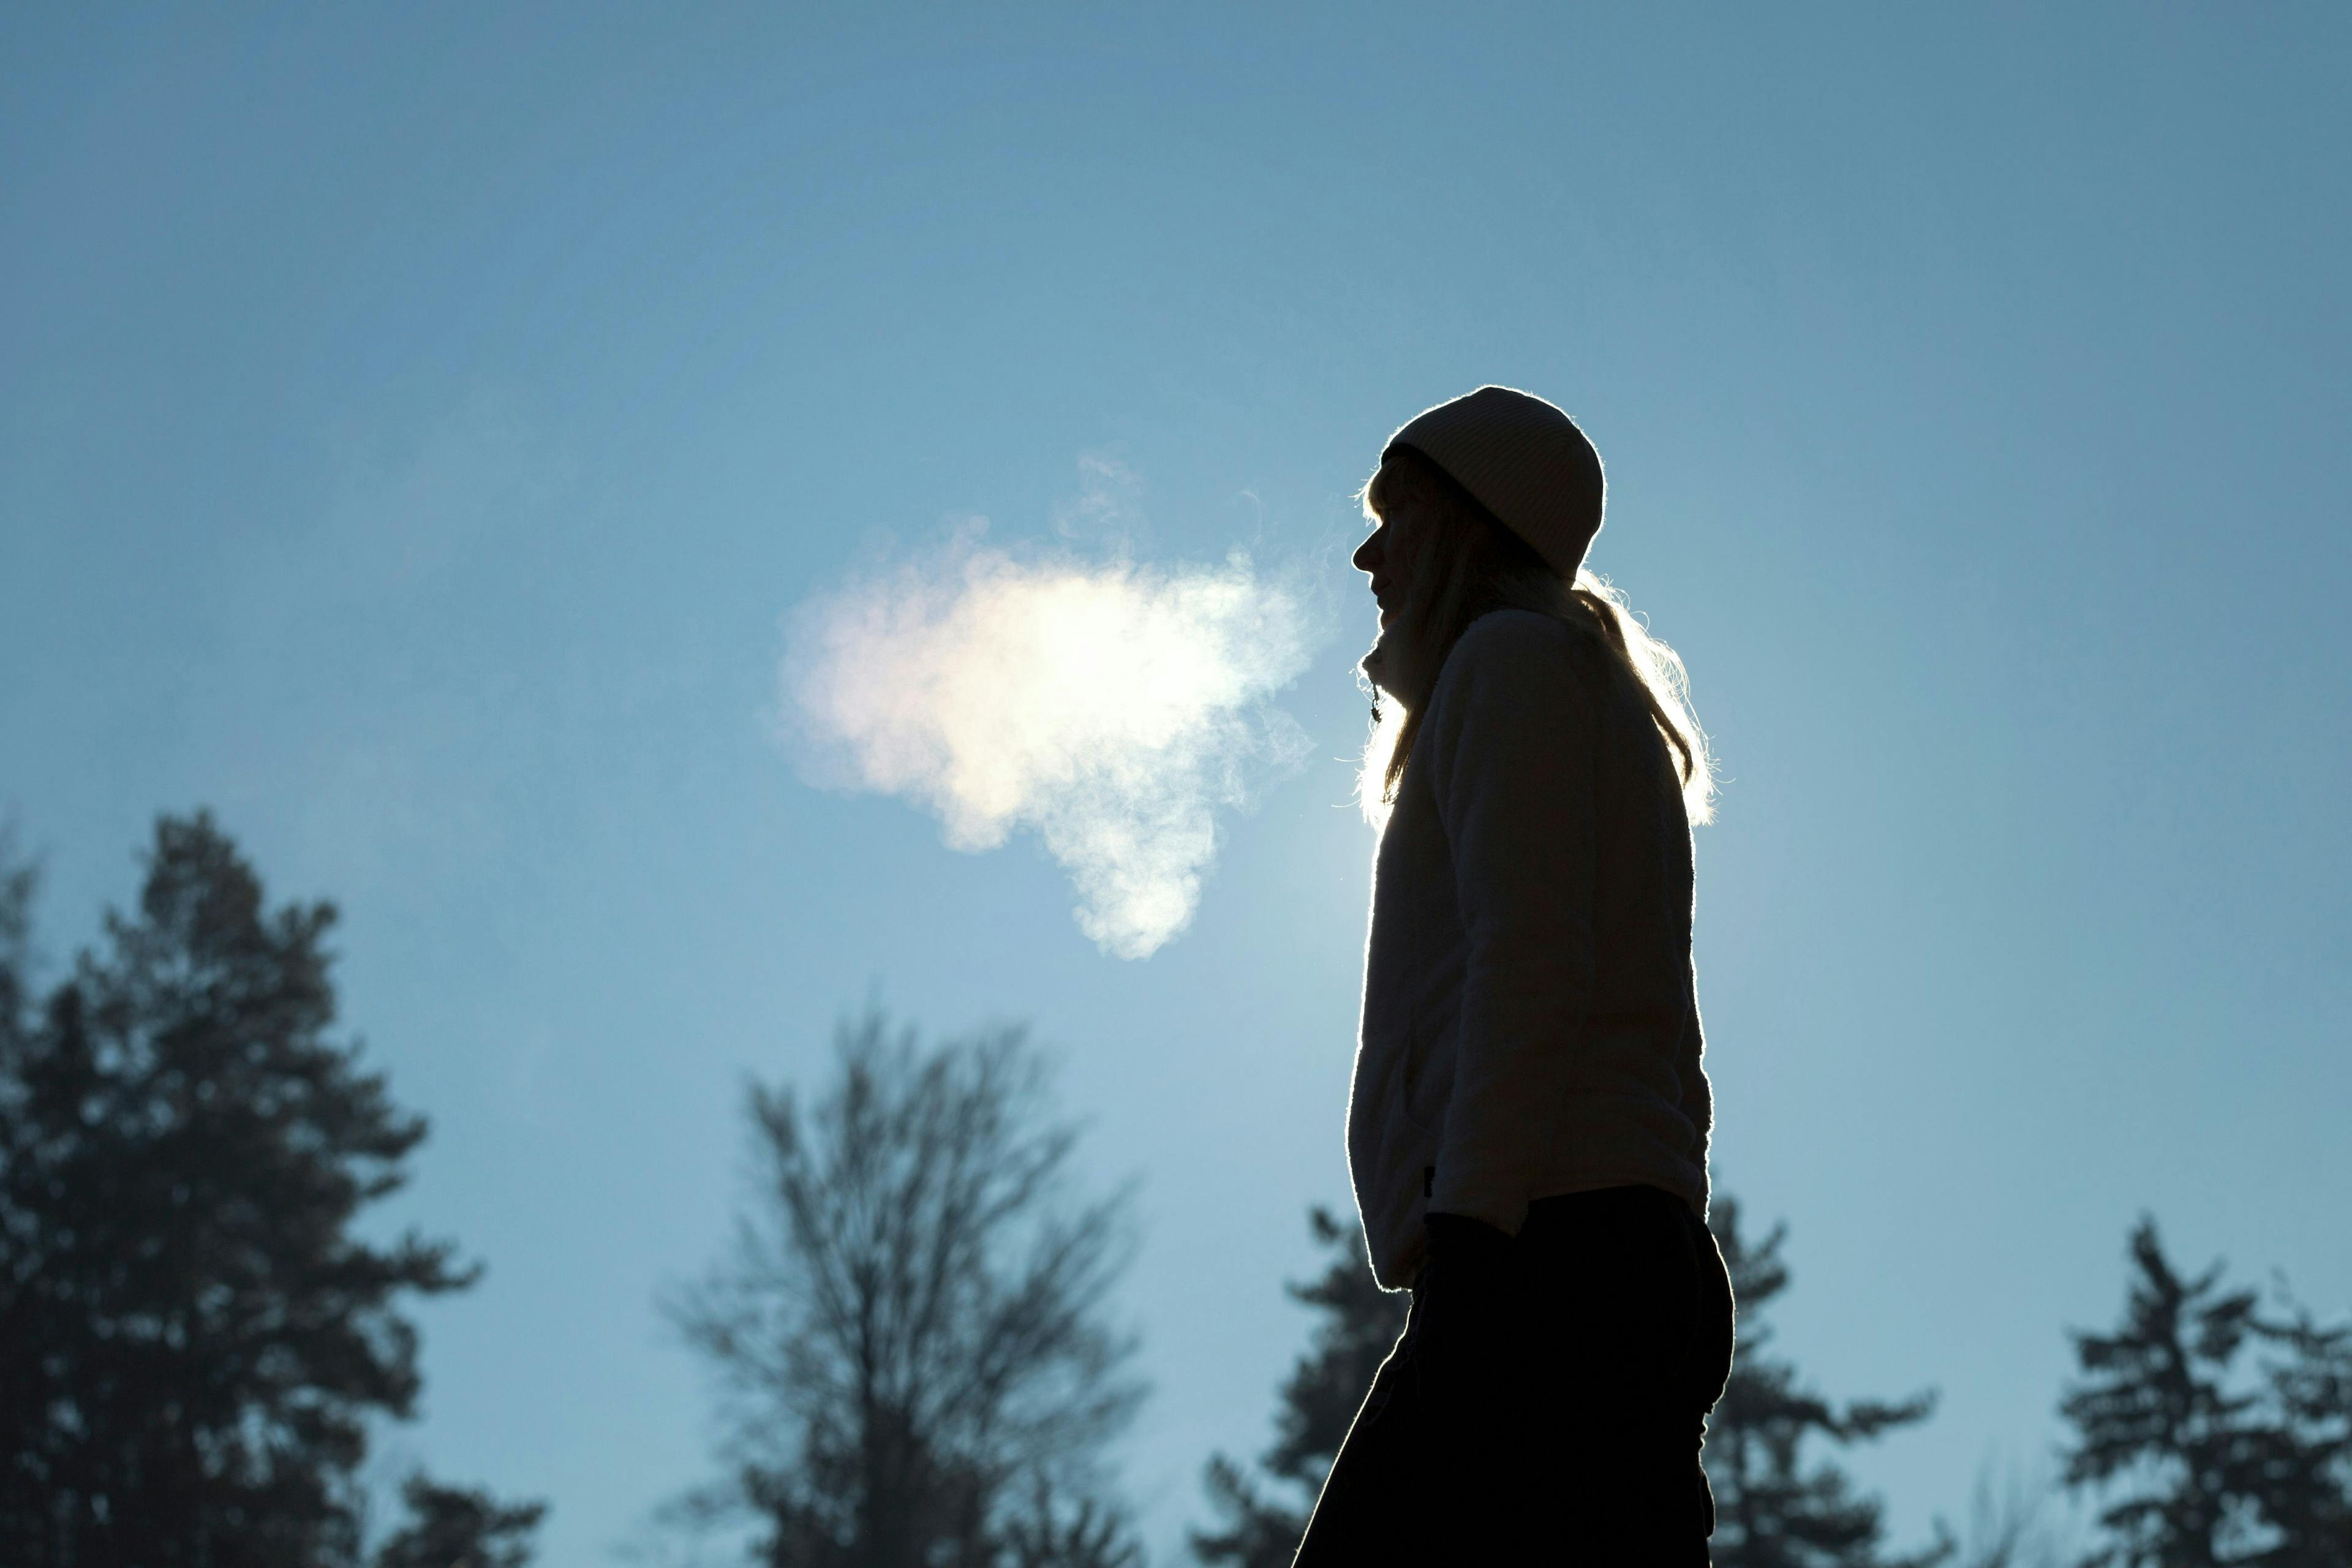 Silhouette of a woman with hat breathing warm air during a cold winter morning. Selective focus used. | Image Credit: © robsonphoto - stock.adobe.com